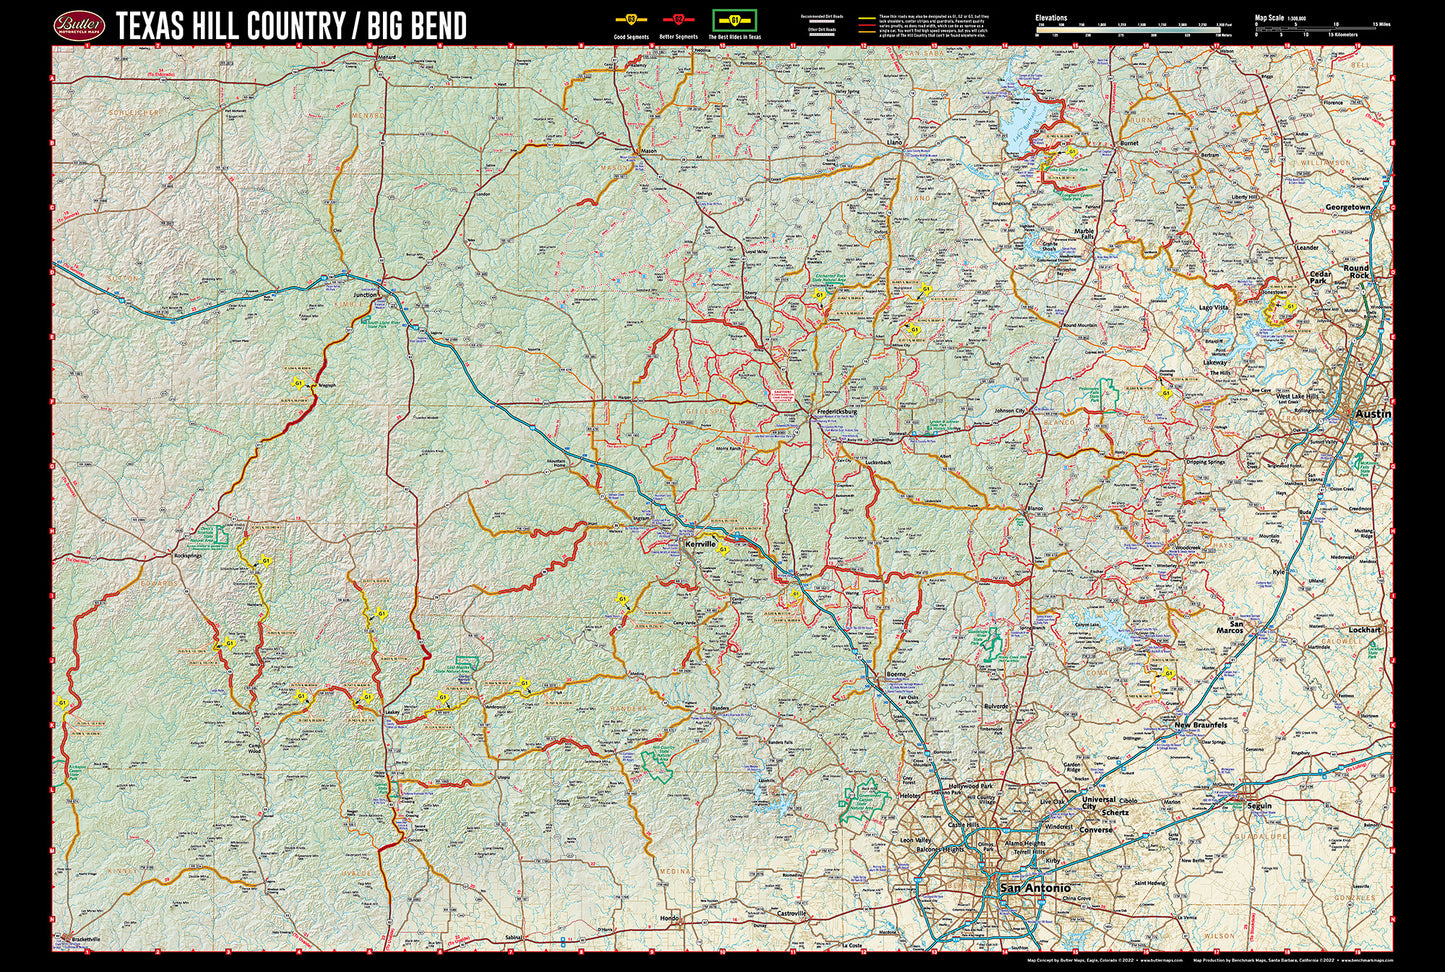 Texas Hill Country/Big Bend NP G1 Map – V7